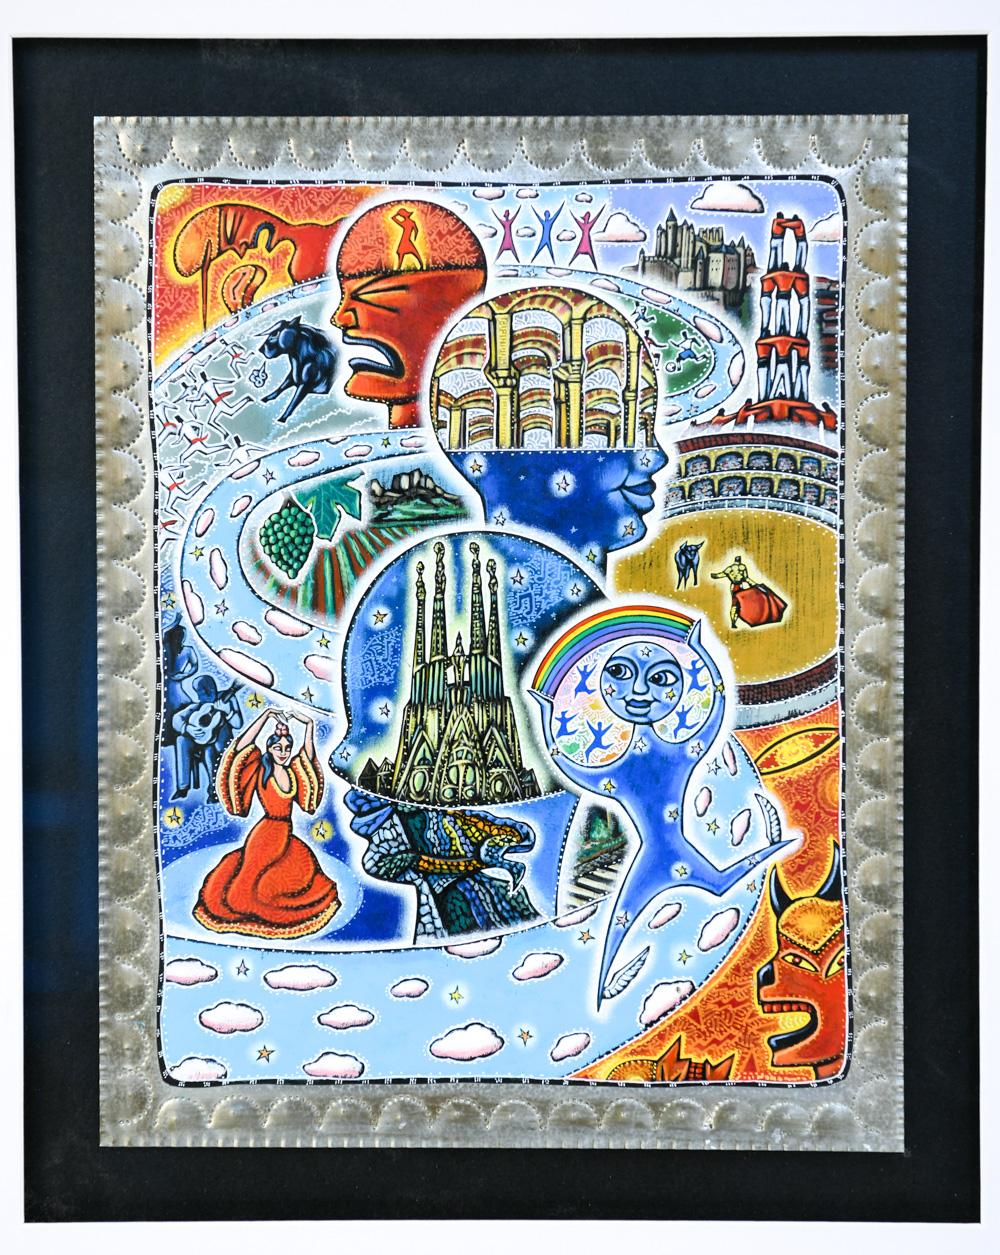 This colorful, contemporary painting depicts the many adventures you may encounter in this life. The artist brings you along an emotional journey with juxtaposing imagery of the ups and Downs of life. The bright colors of the acrylic/oil on tin with